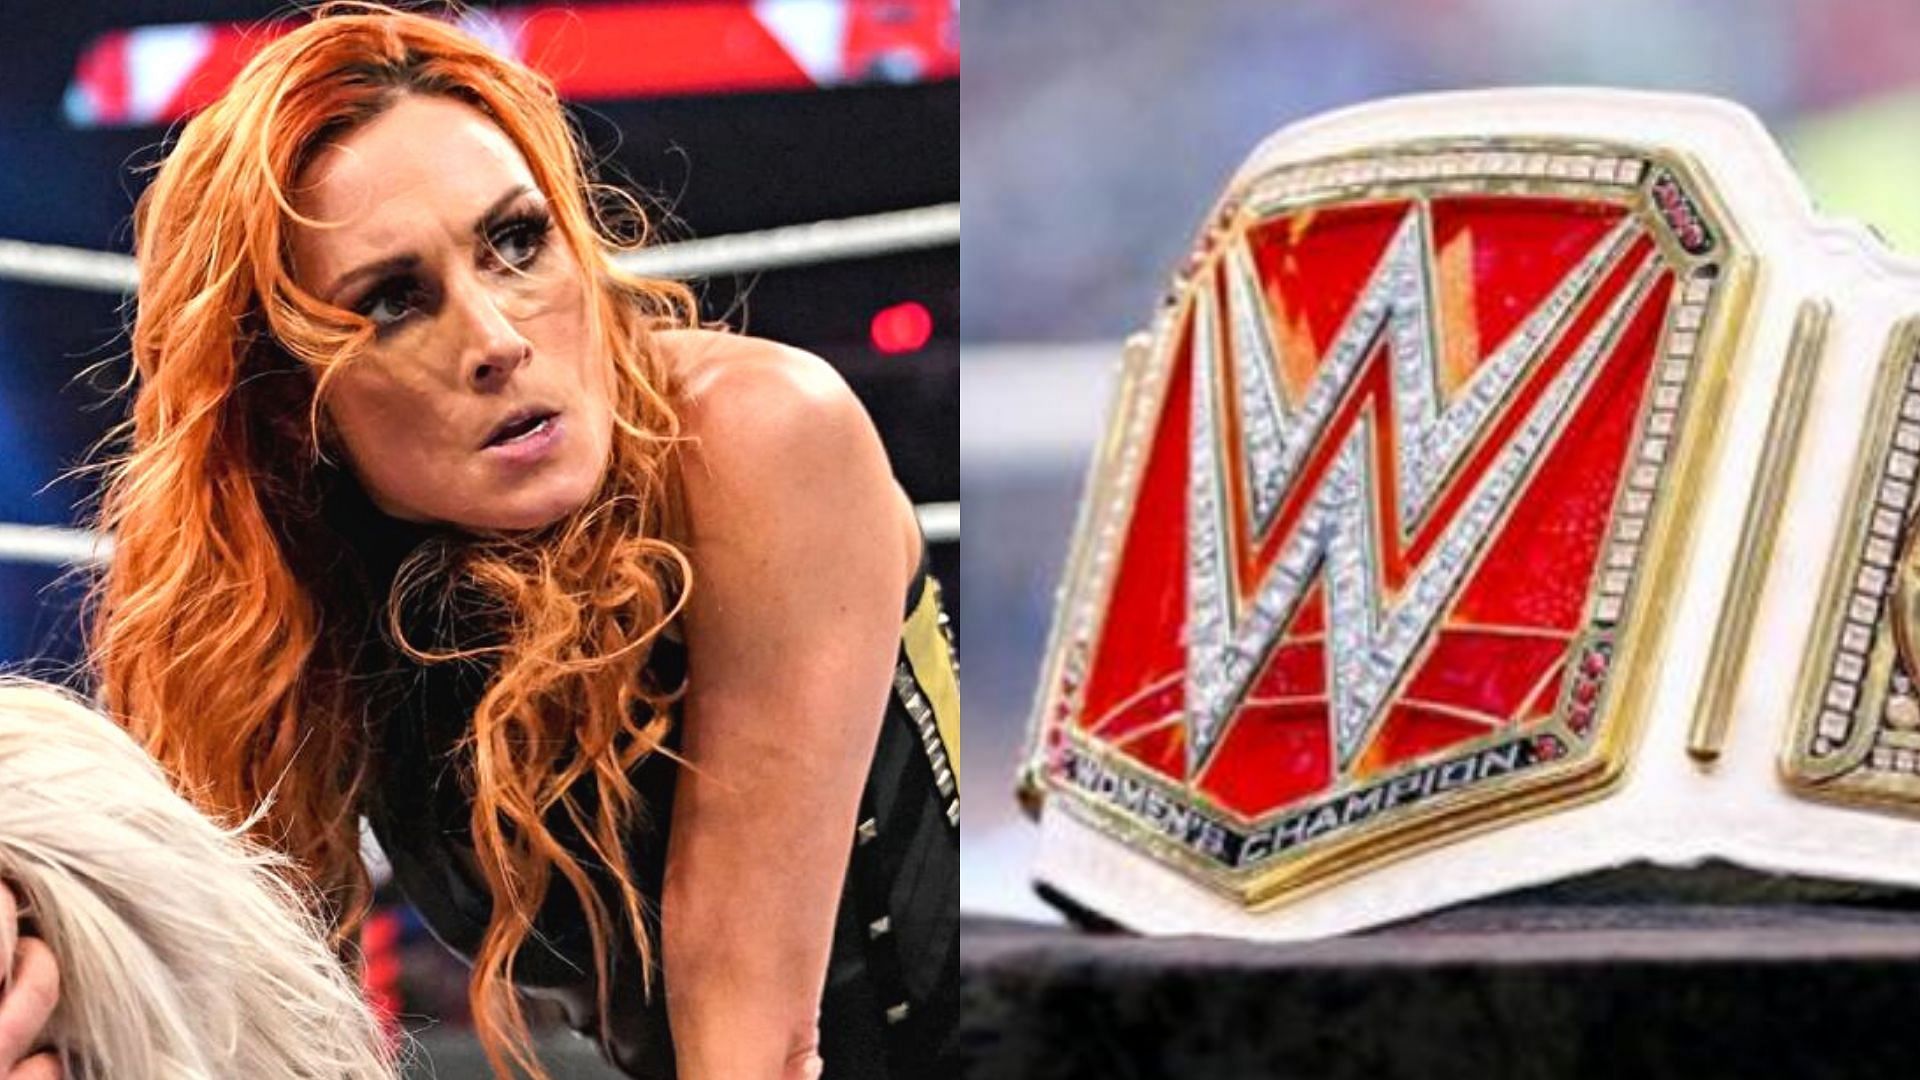 <div></noscript>Speculation on who could be the next RAW Women's Champion after Becky Lynch - Report</div>